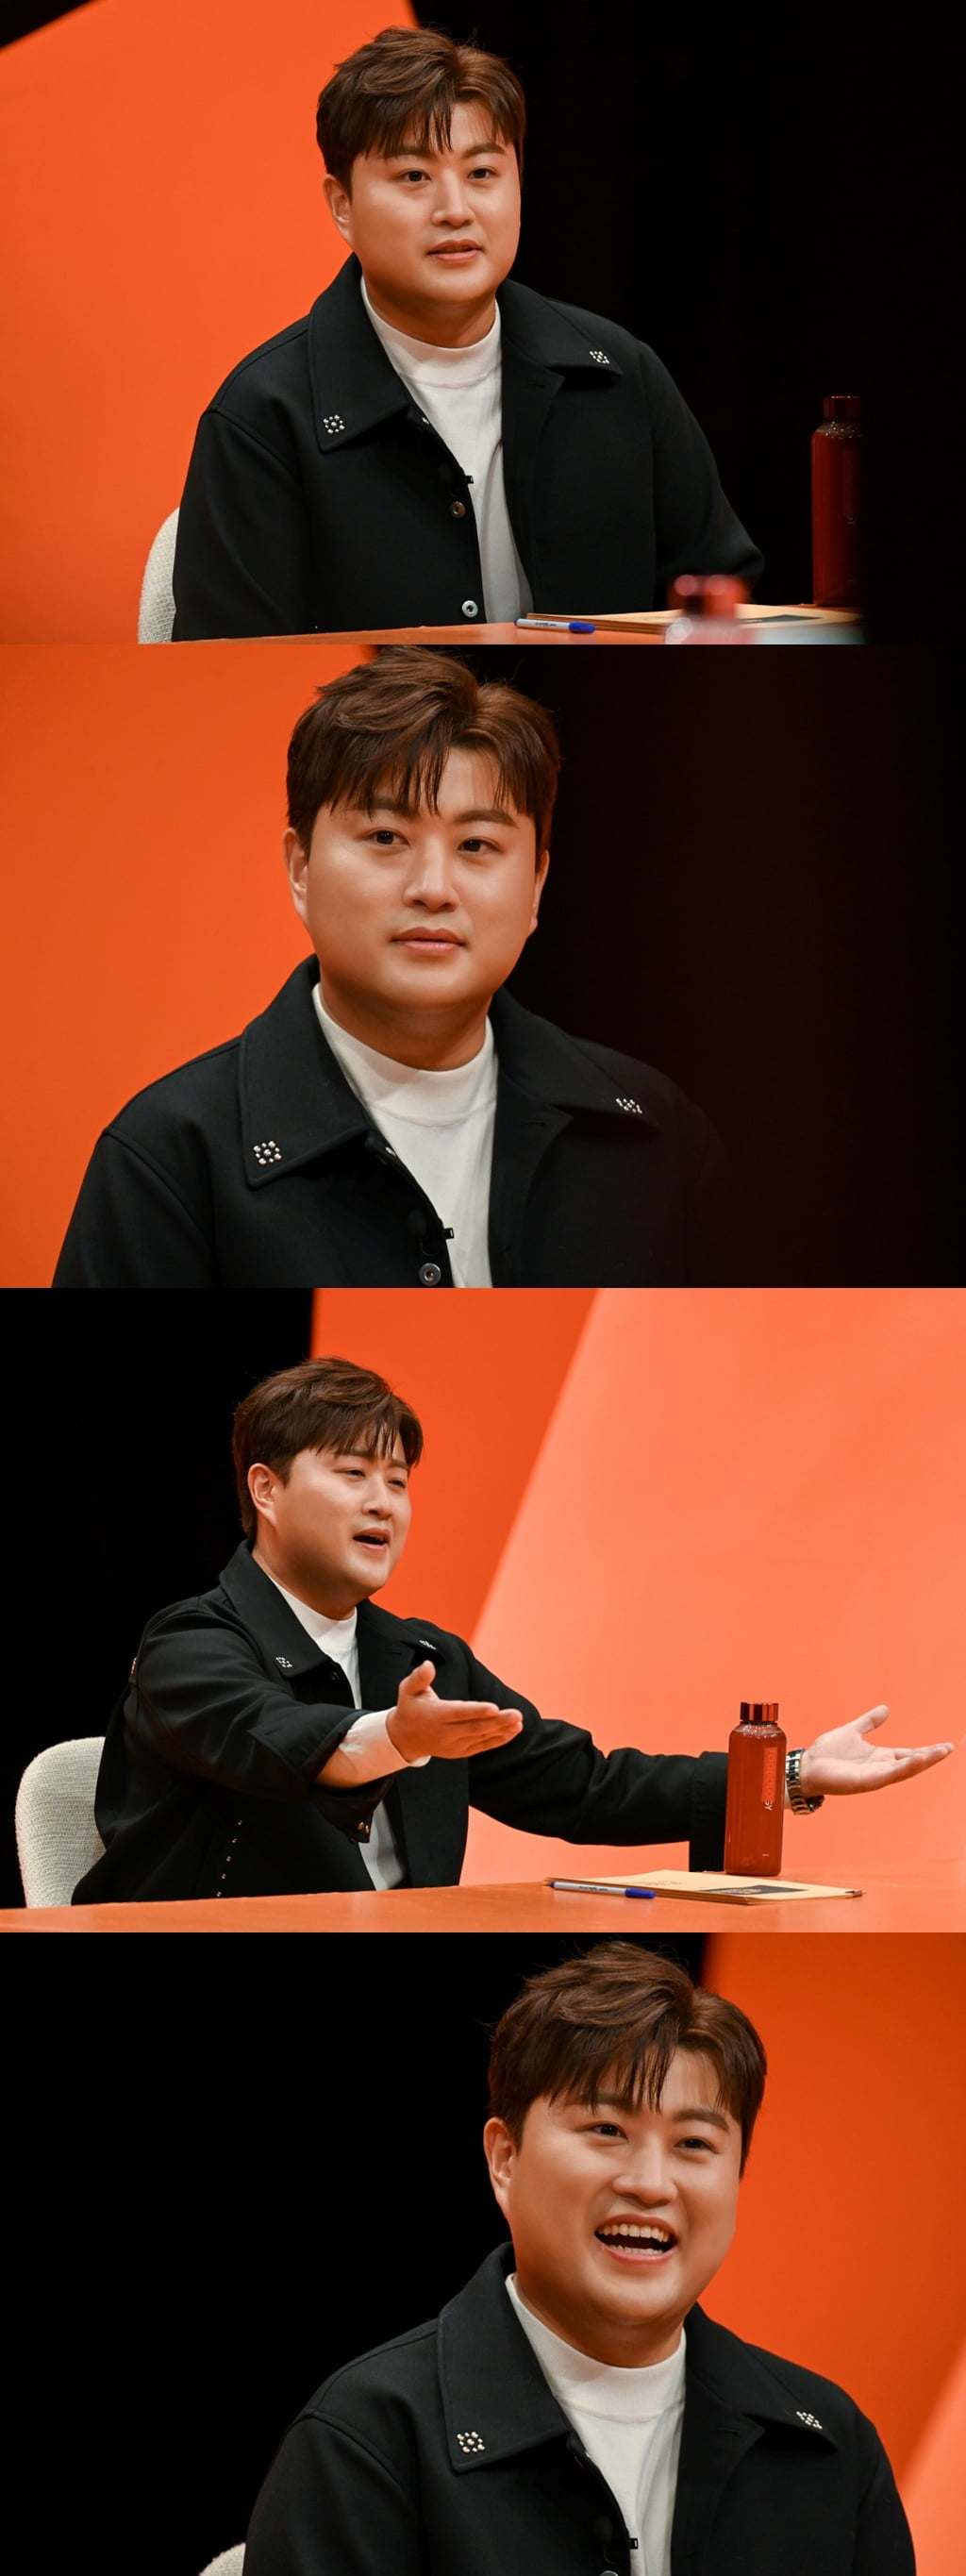 Kim Ho-jung, delivery food costs 400,000 won per day